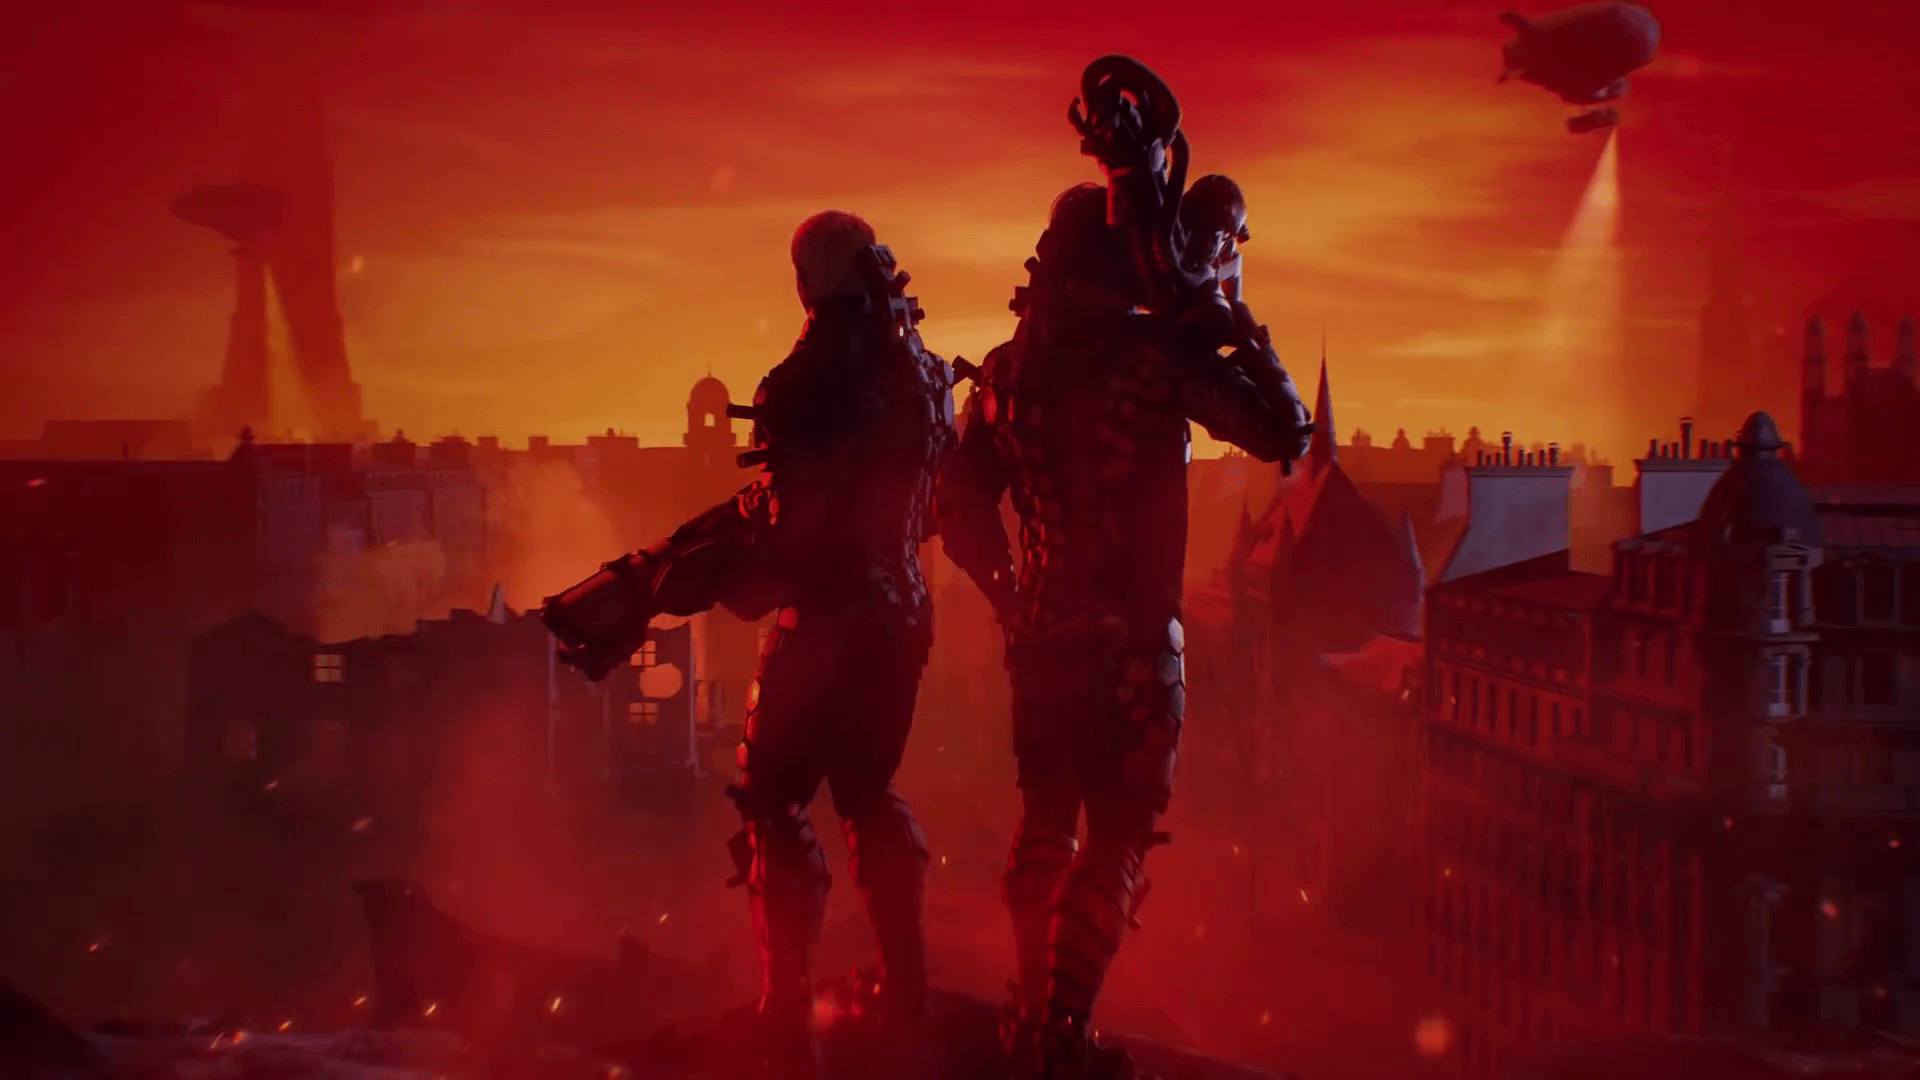 Wolfenstein Youngblood teaser suggests new details coming soon